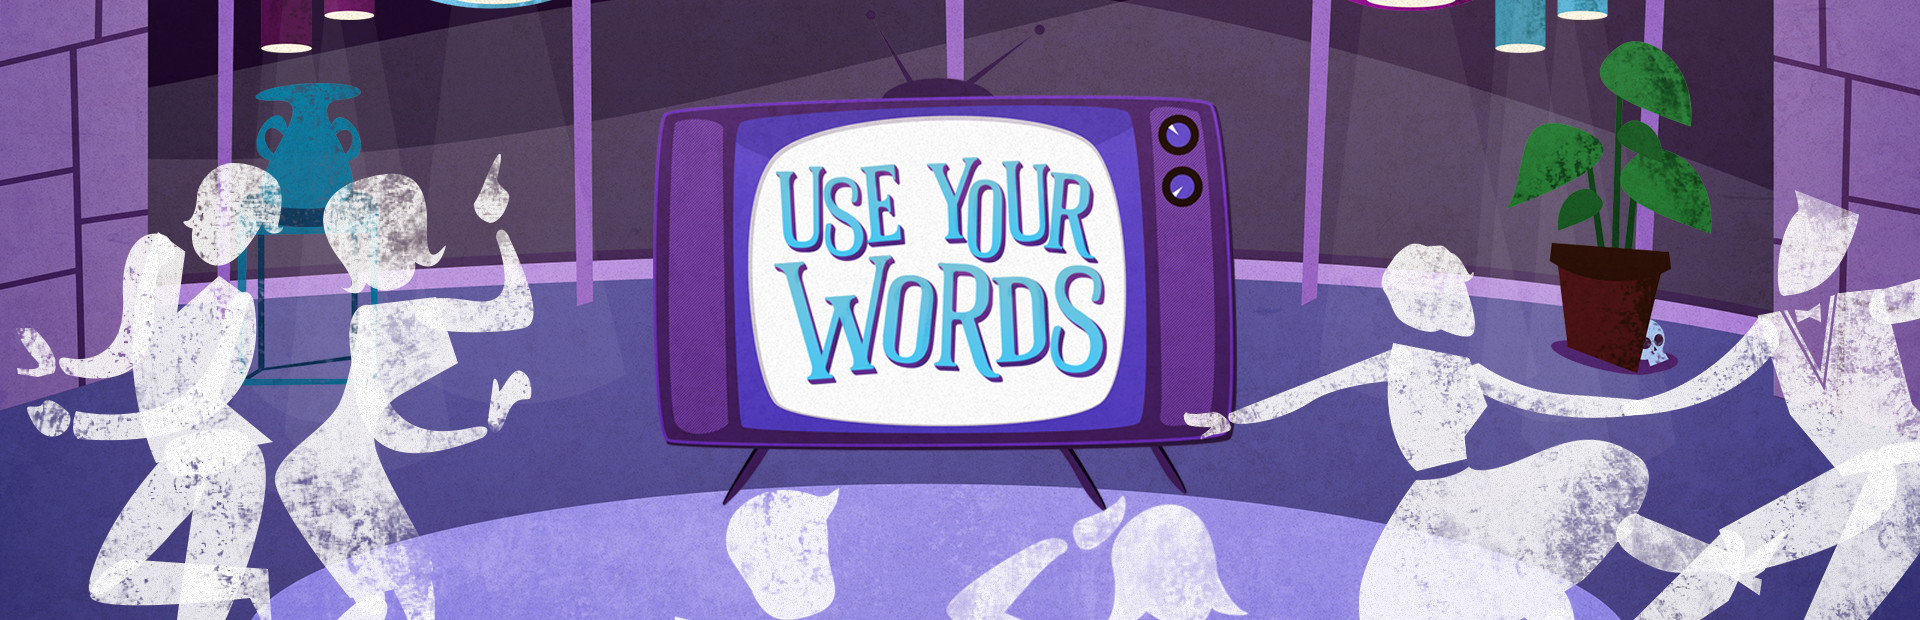 Use Your Words cover image